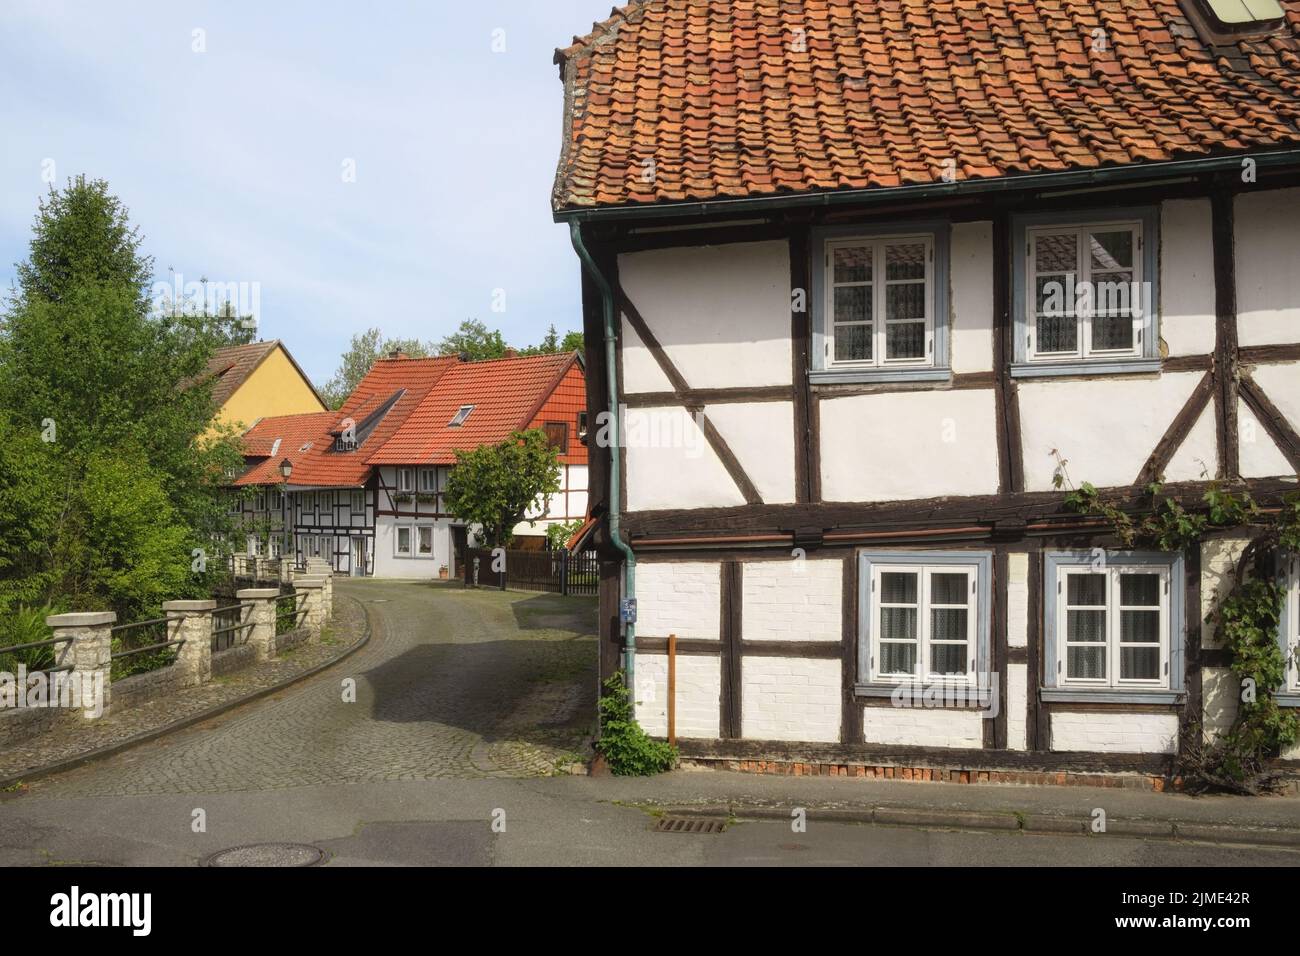 Hornburg - Historical old town, Germany Stock Photo